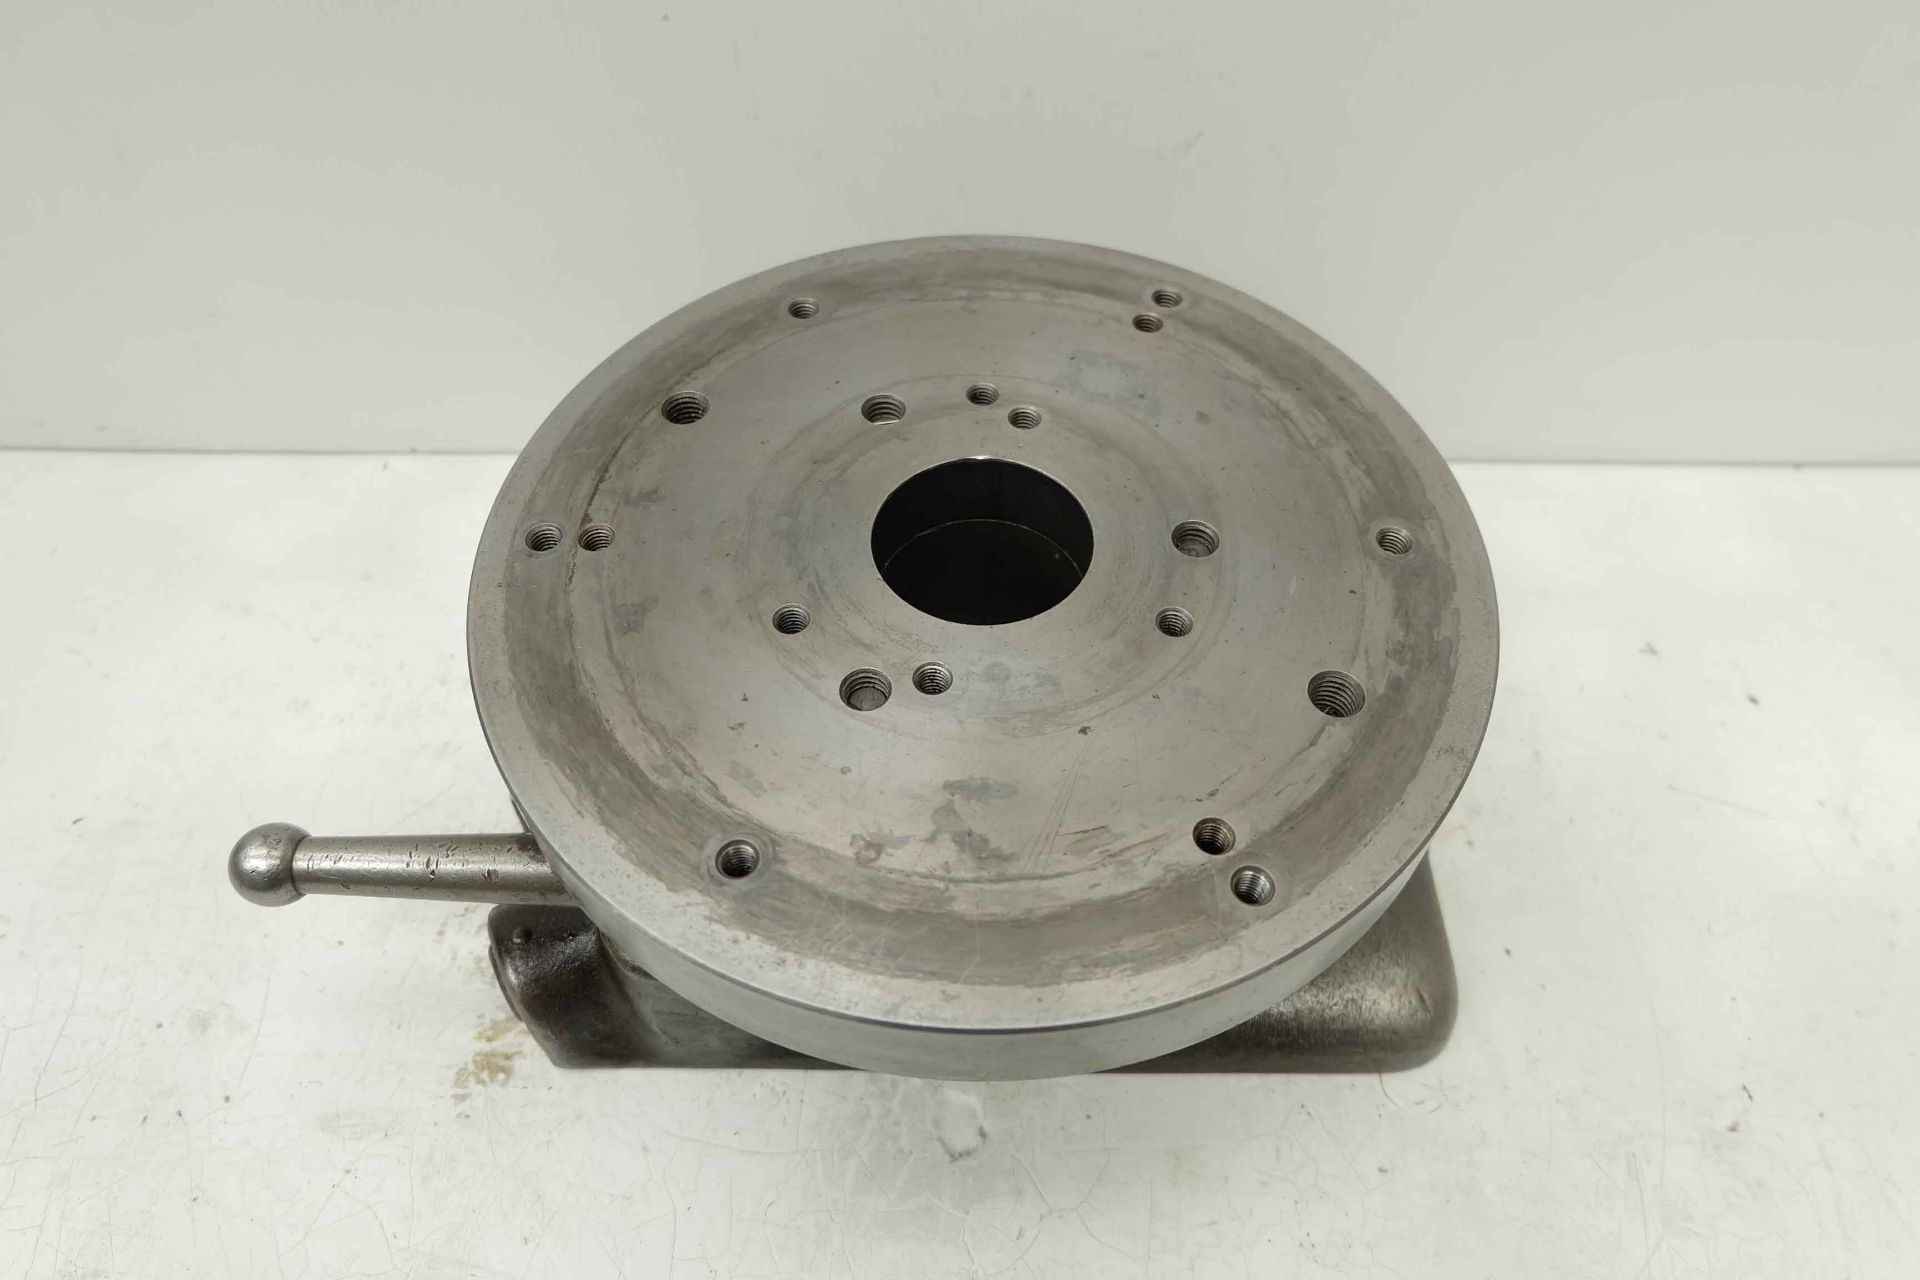 Indexing Fixture 24 Posistion. With 240 mm Diameter Back Plate Fitted To Suit Chucks. - Image 2 of 6